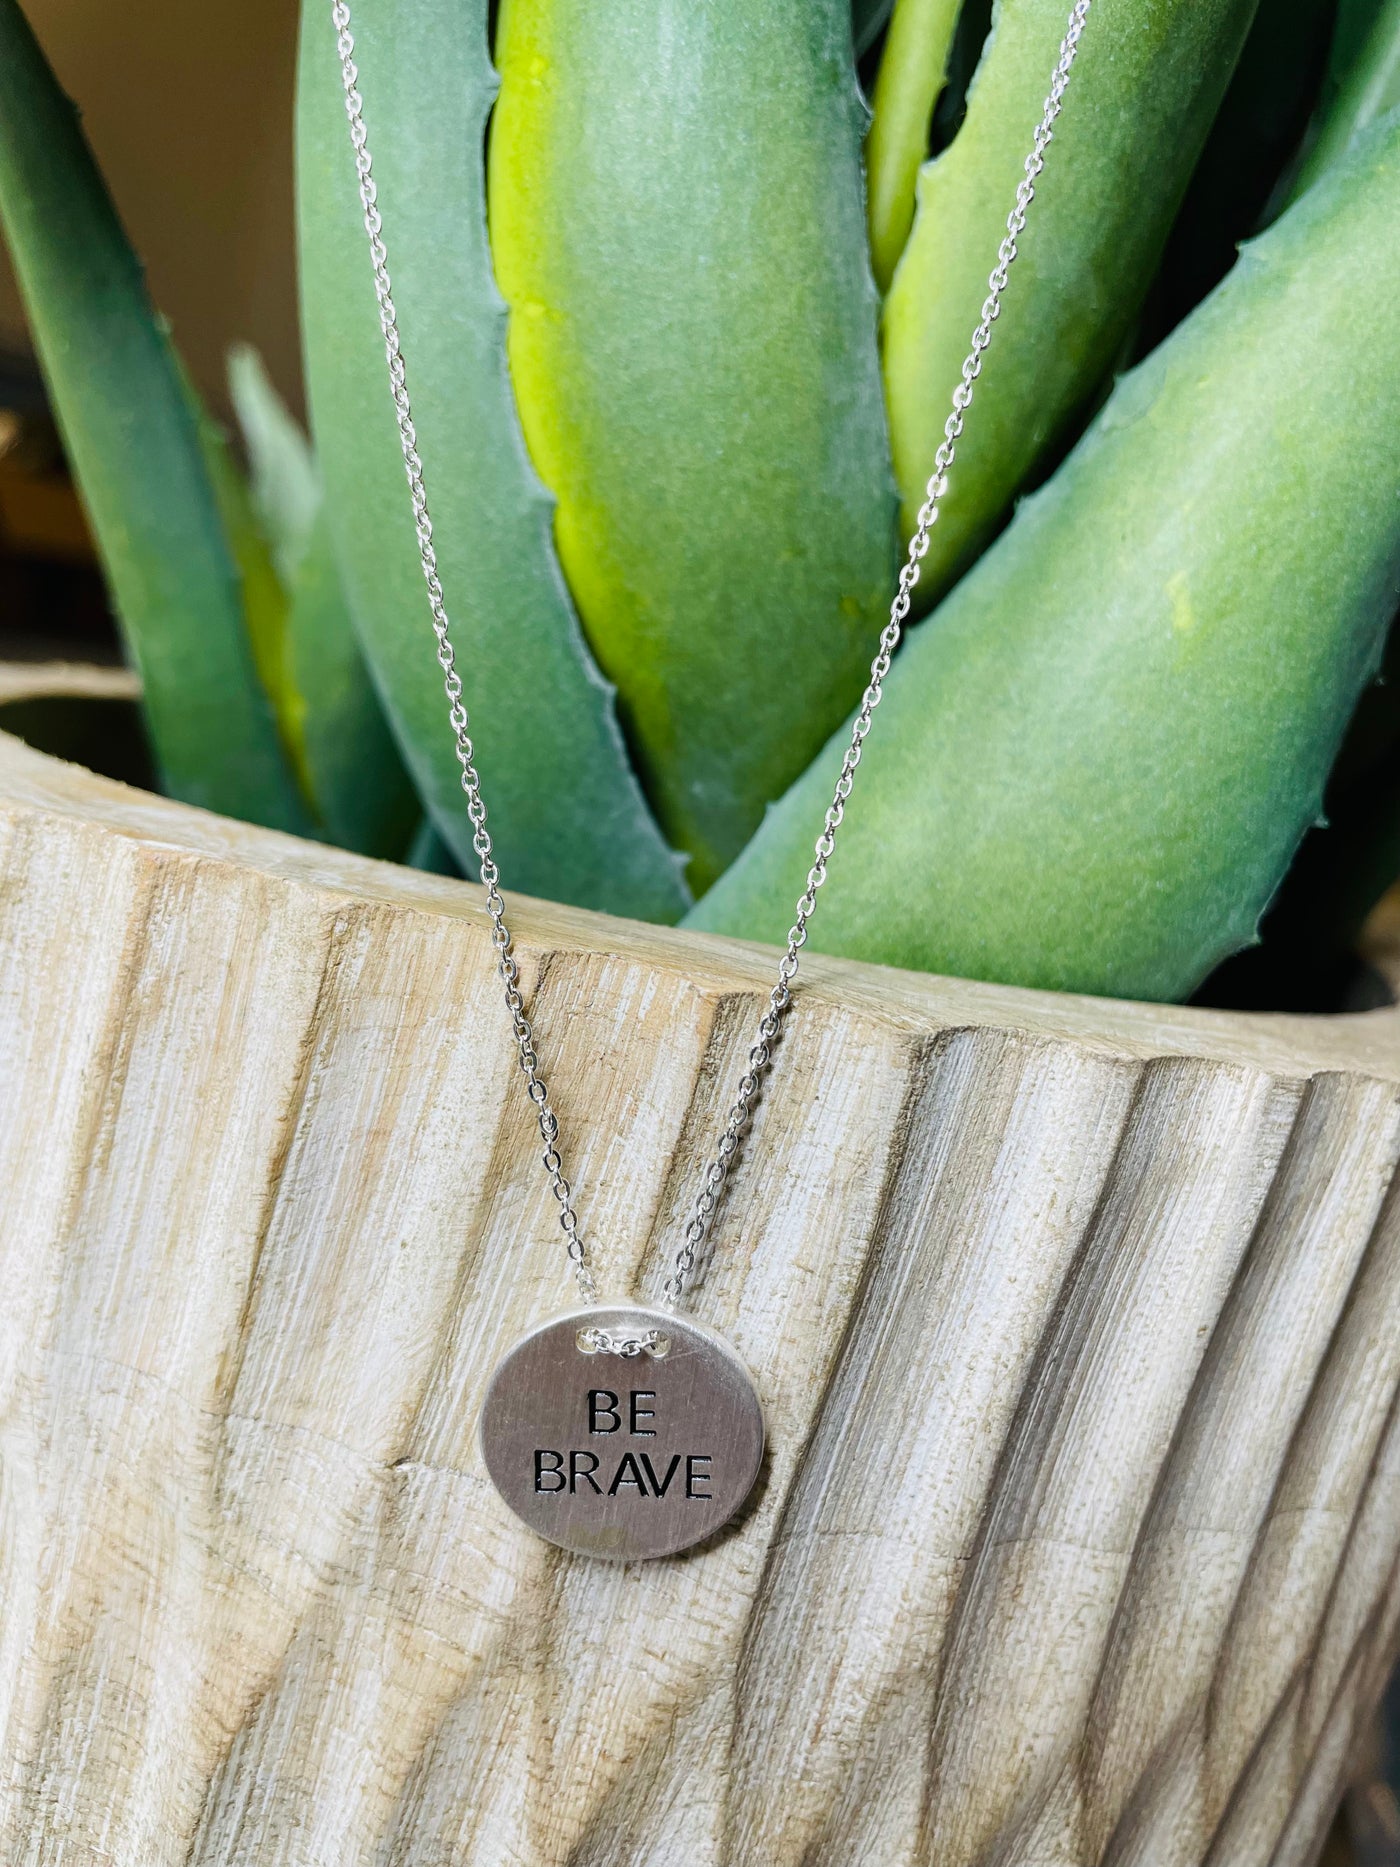 The Be Brave Necklace